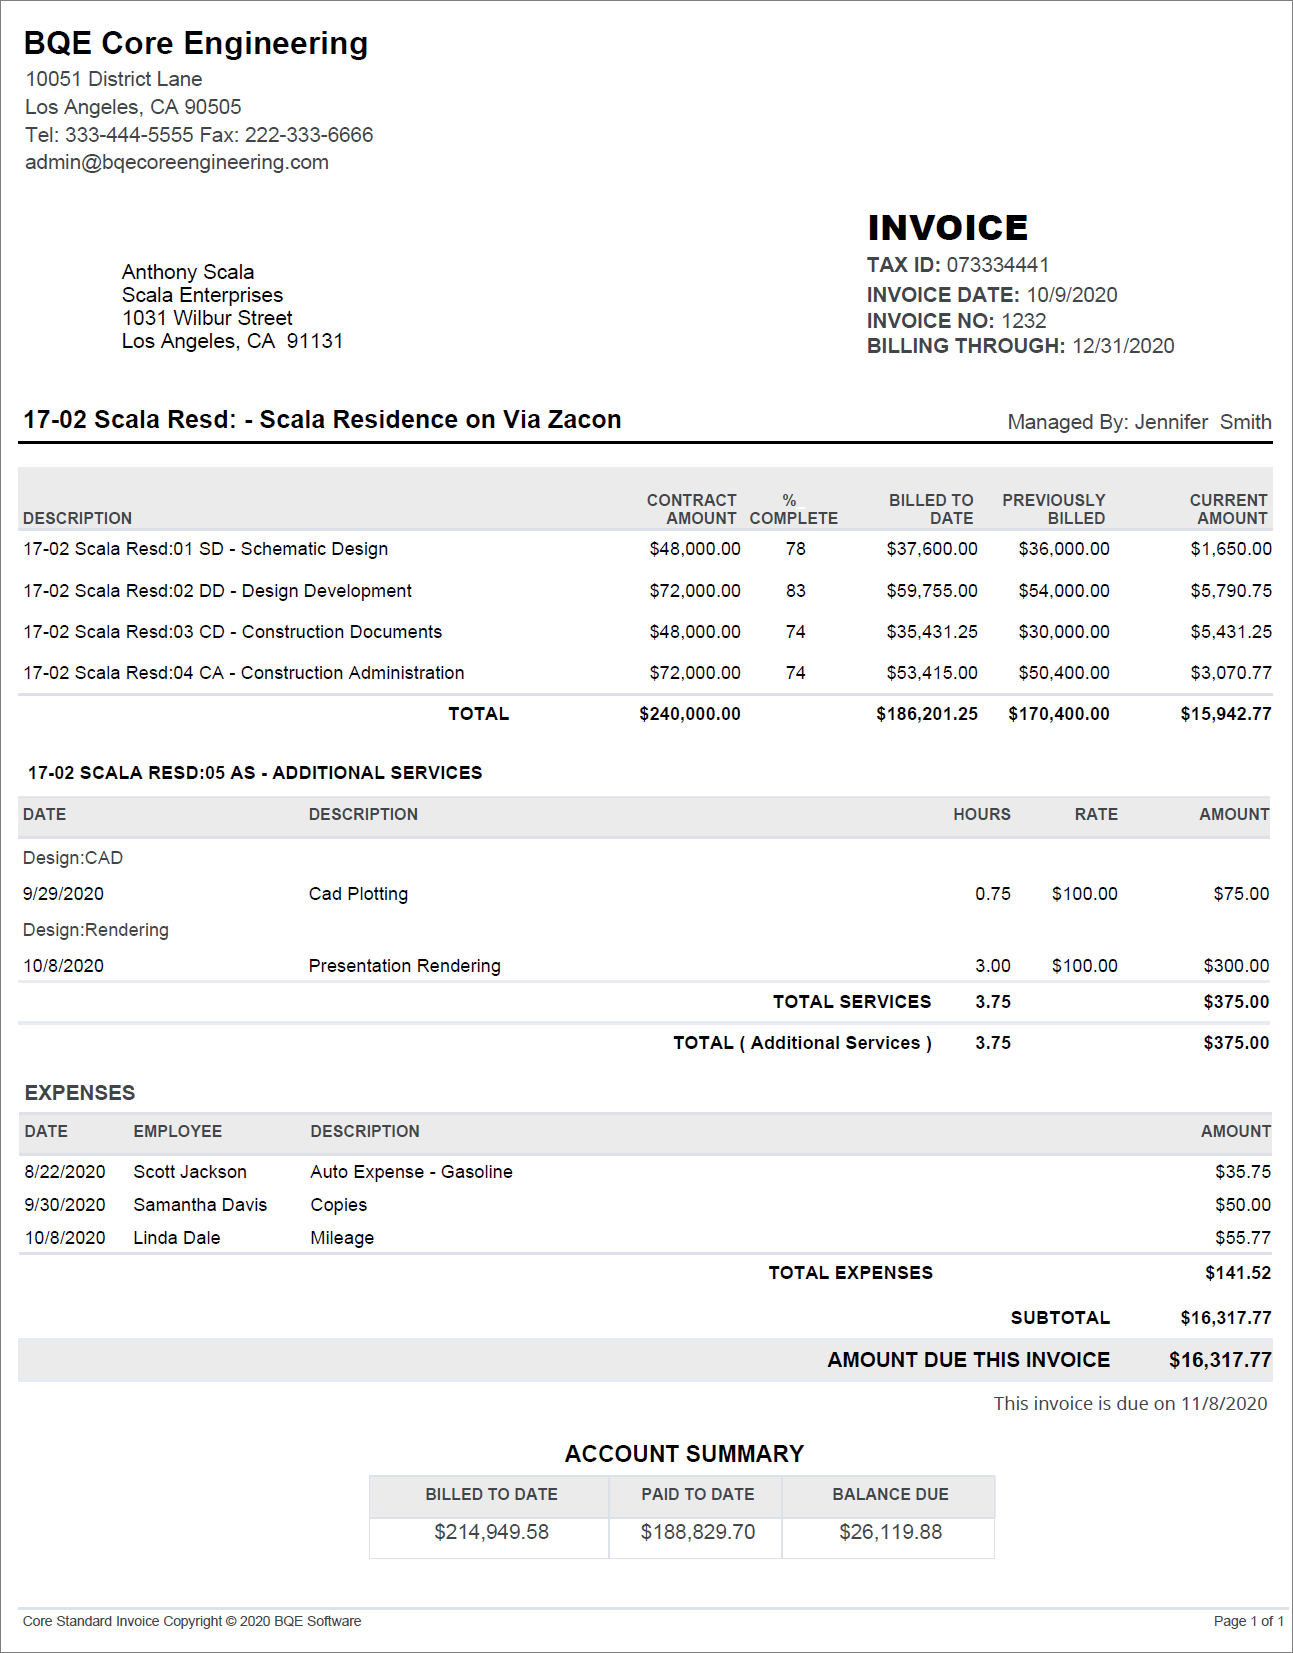 Phased_invoice_new.png